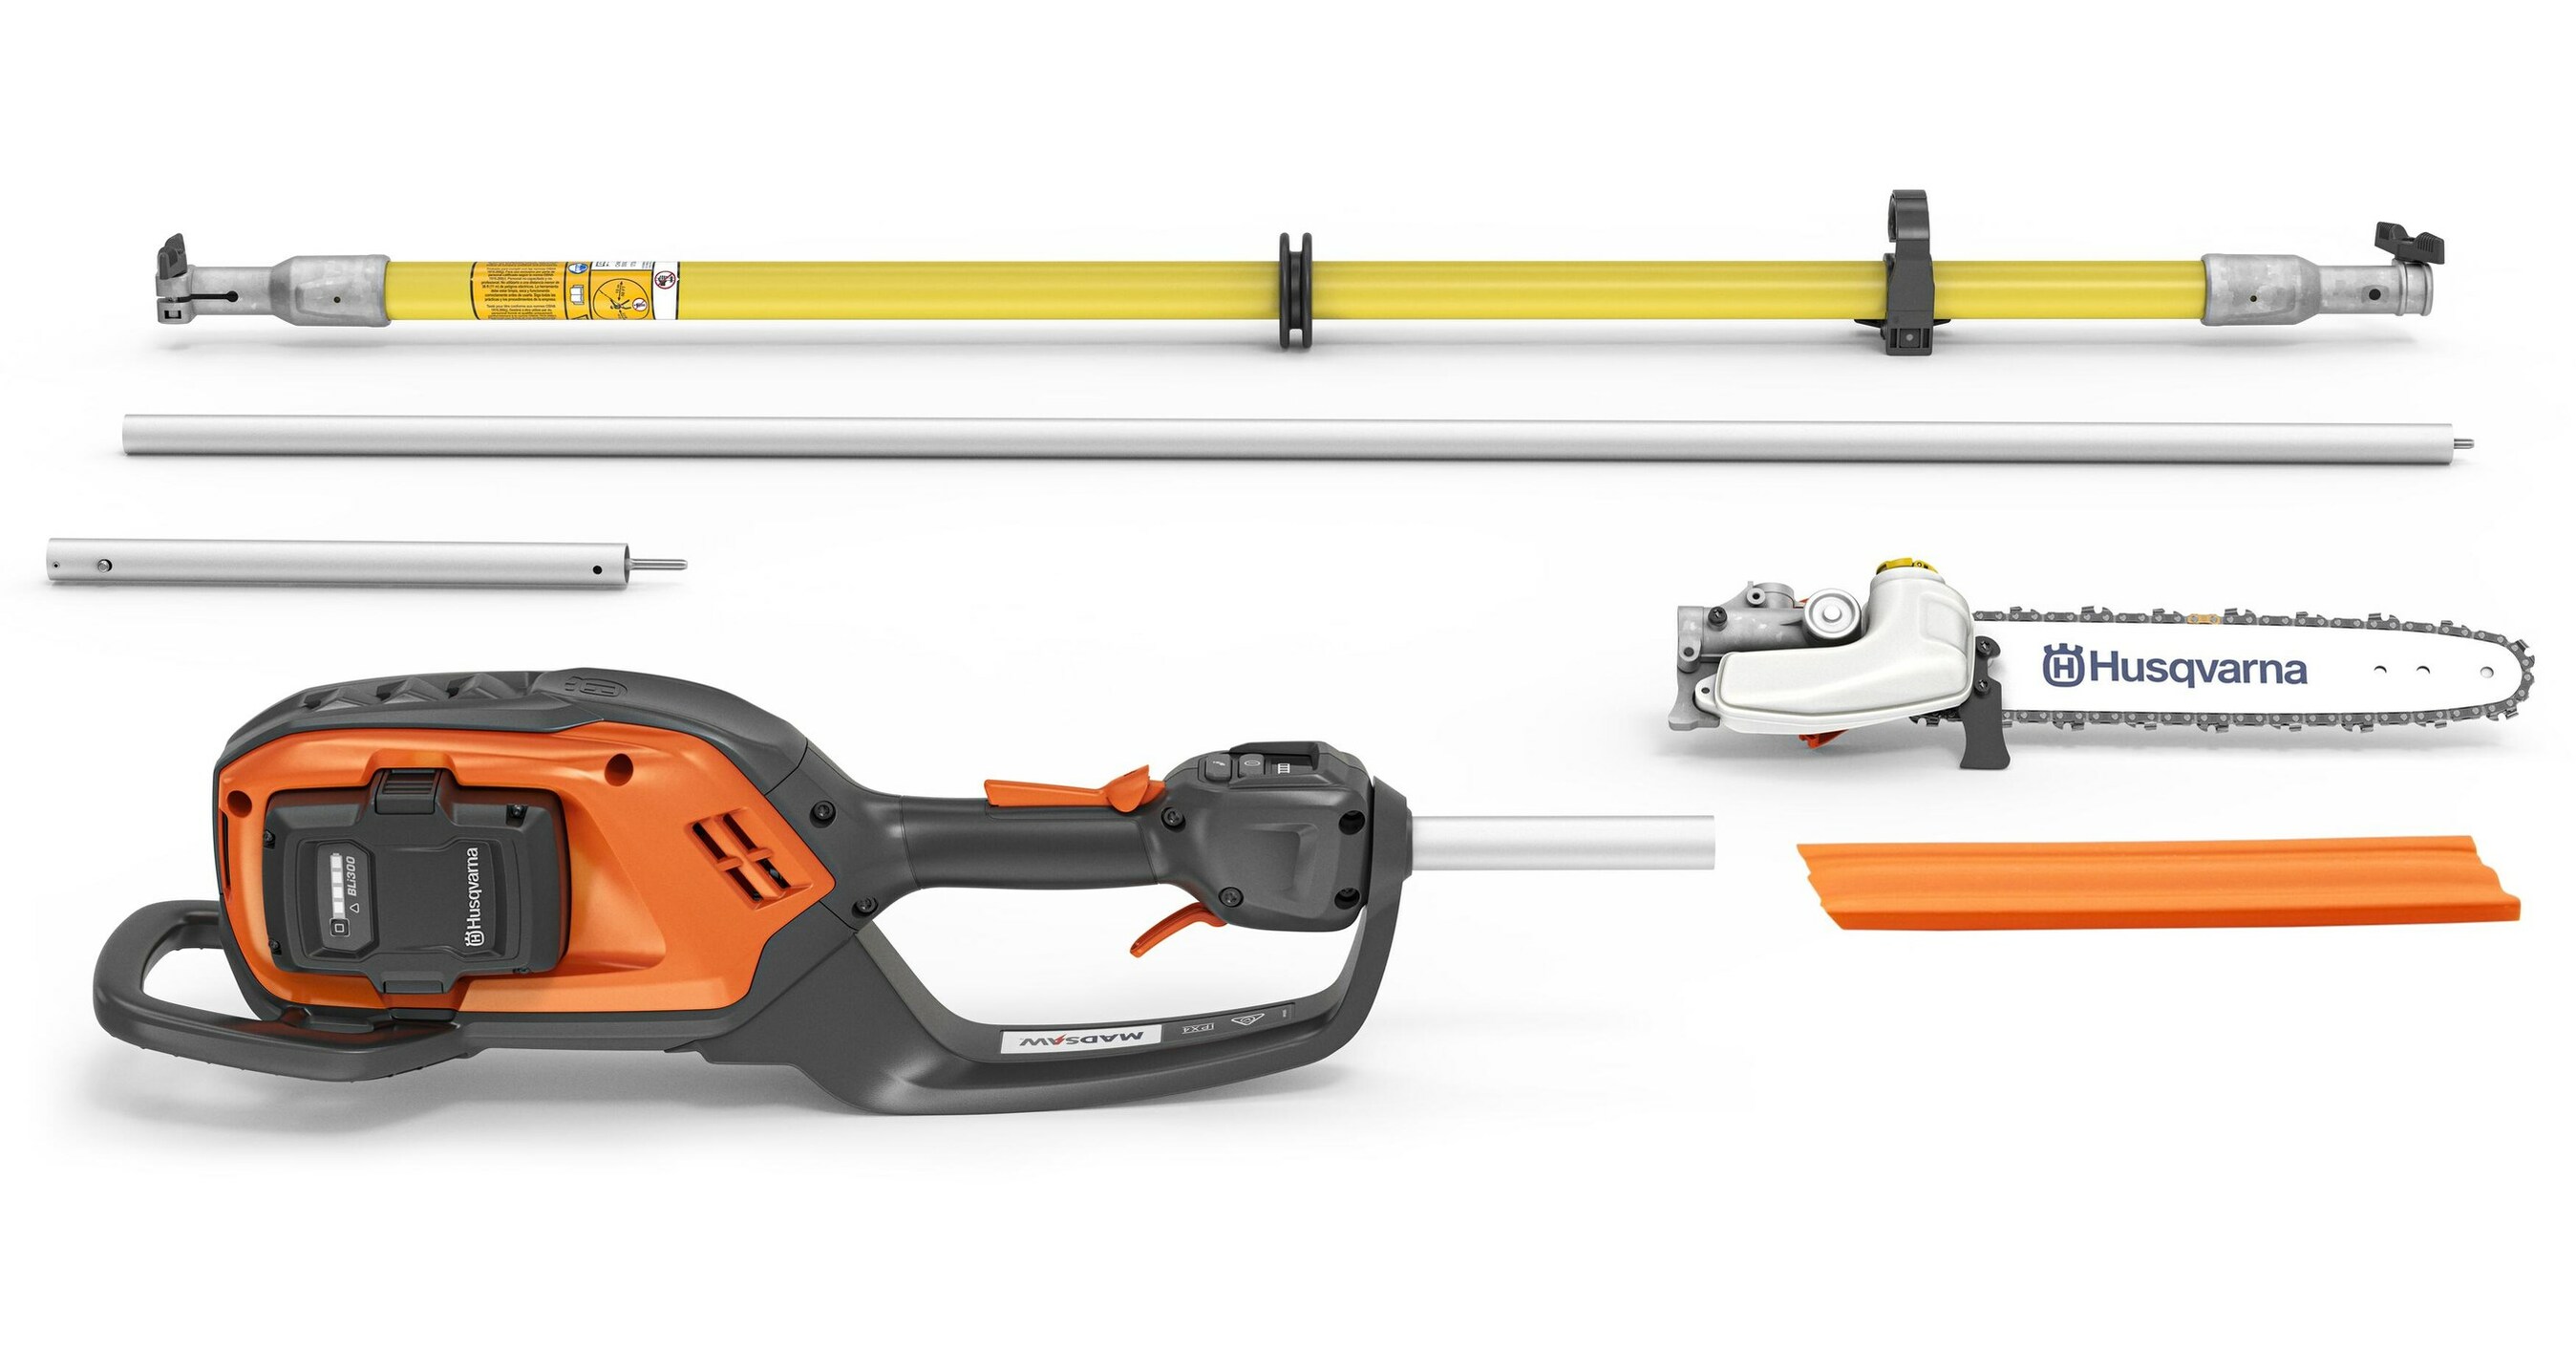 Husqvarna Launches Max Battery Series Product Line with Five New Tools That  Provide Homeowners Uncompromising Power and Performance to Tackle the  Toughest Yard Maintenance Jobs